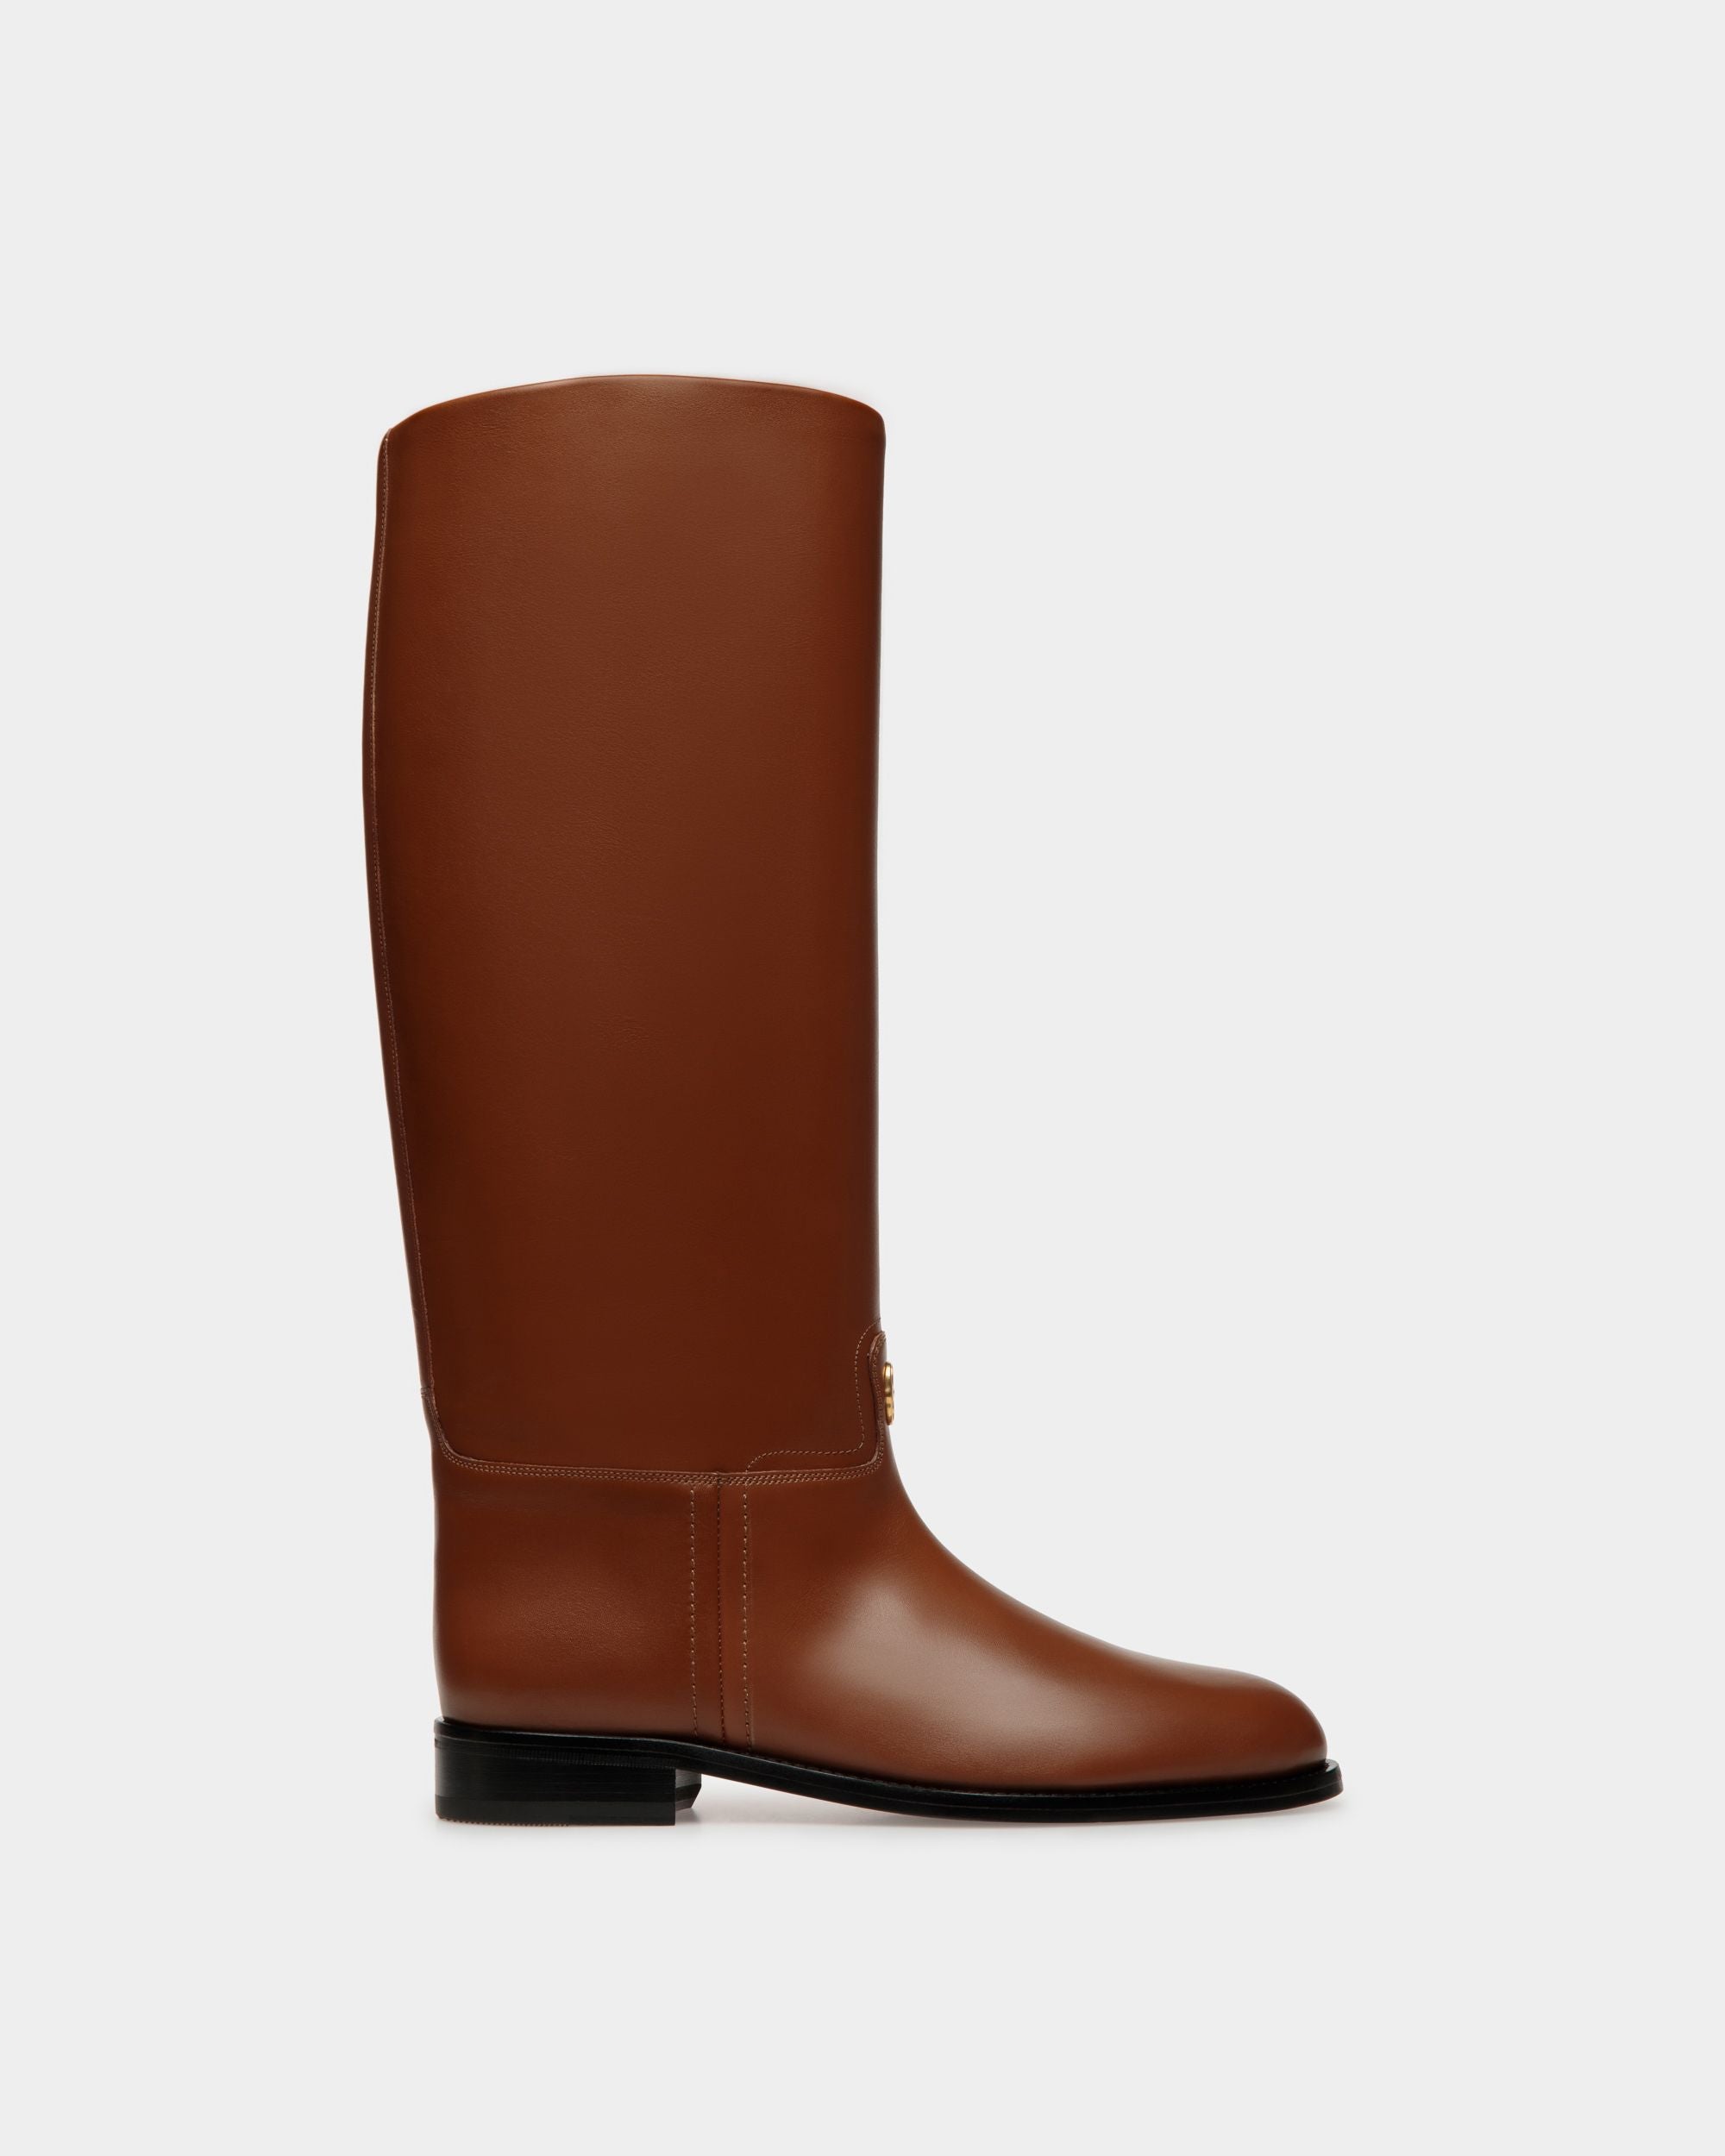 Hollie | Women's Long Boots | Brown Leather | Bally | Still Life Side